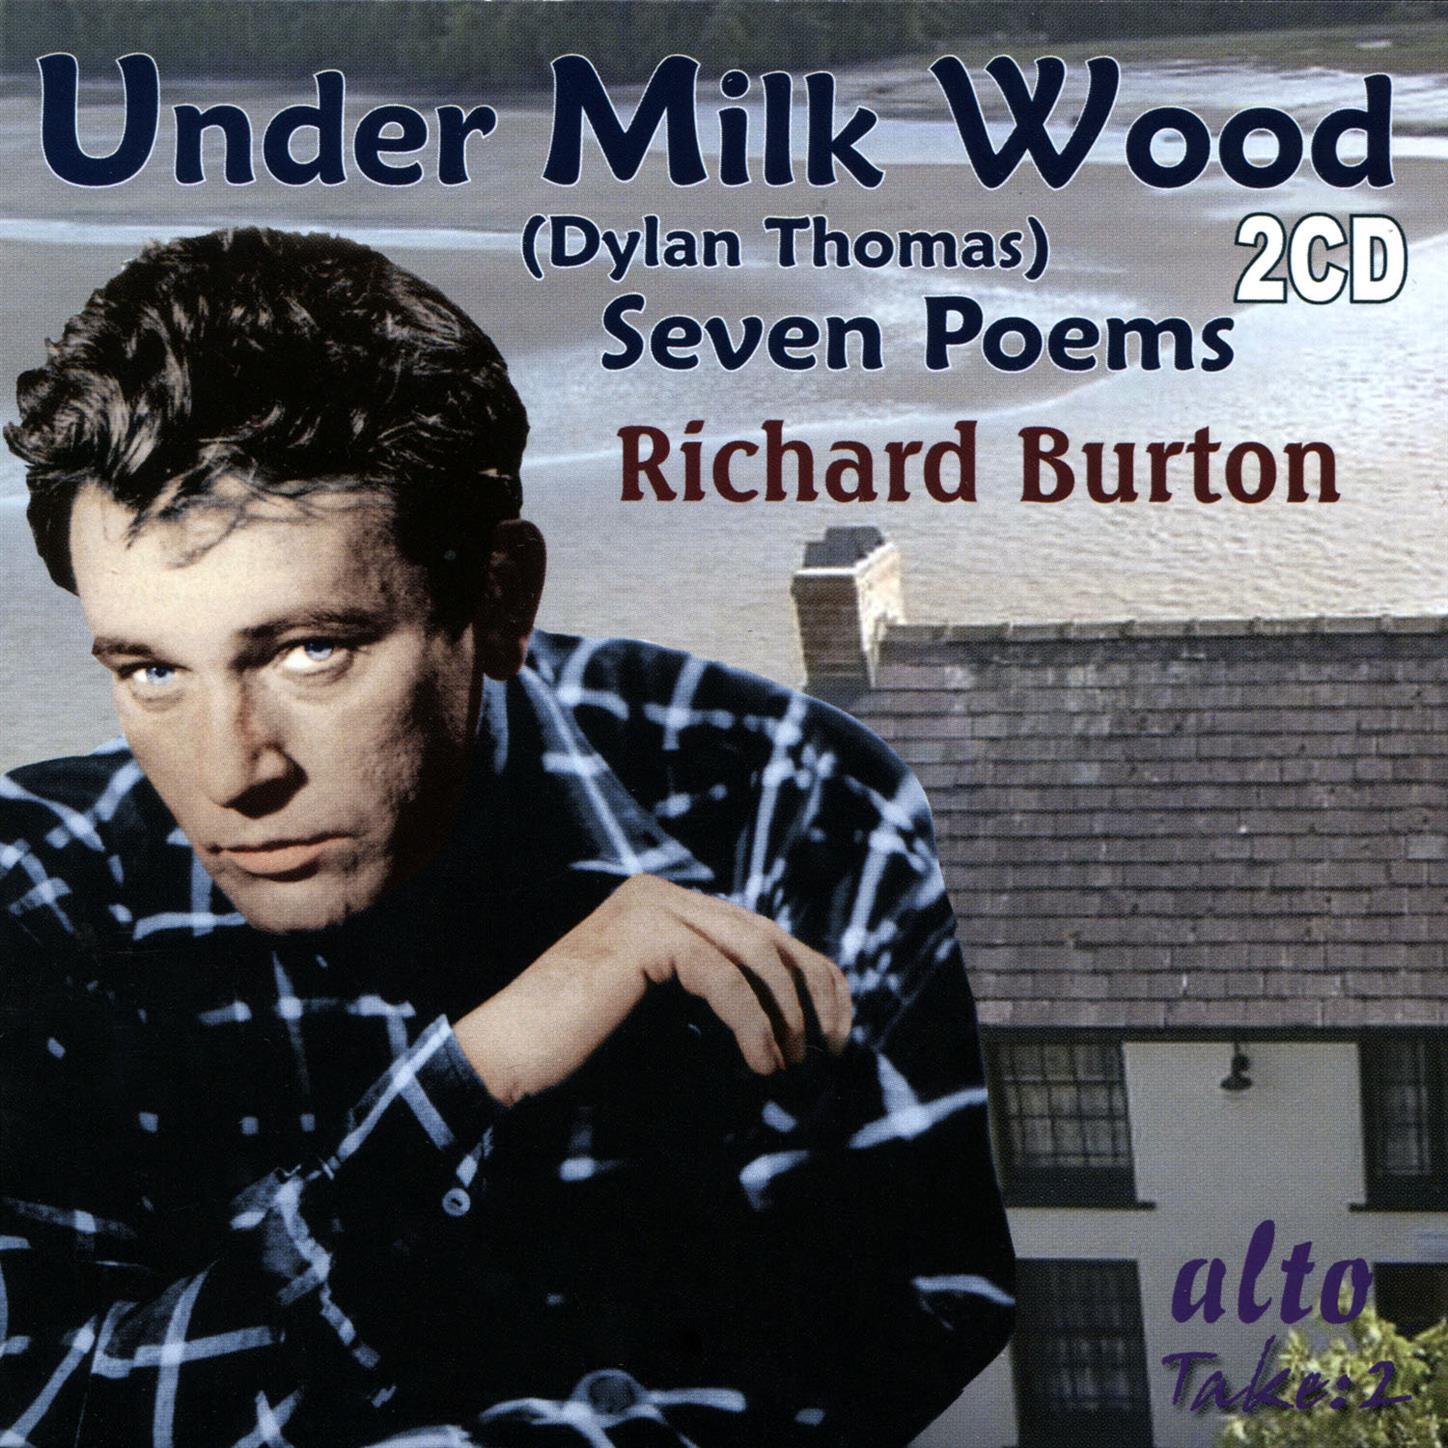 Under Milk Wood: The sunny slow lolling